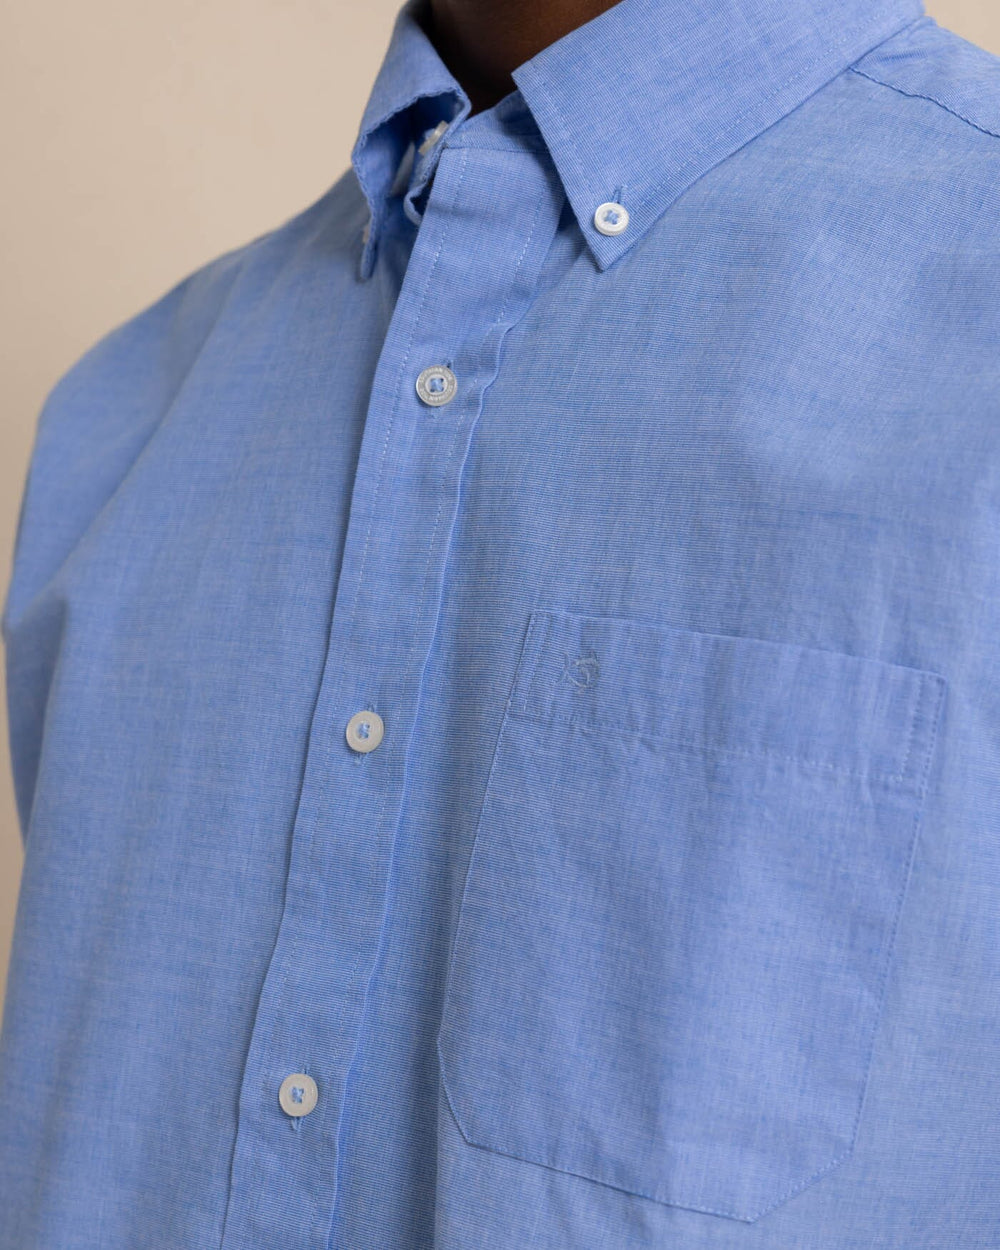 The detail view of the Men's Blue Sullivans Solid Button Down Shirt by Southern Tide - Sail Blue